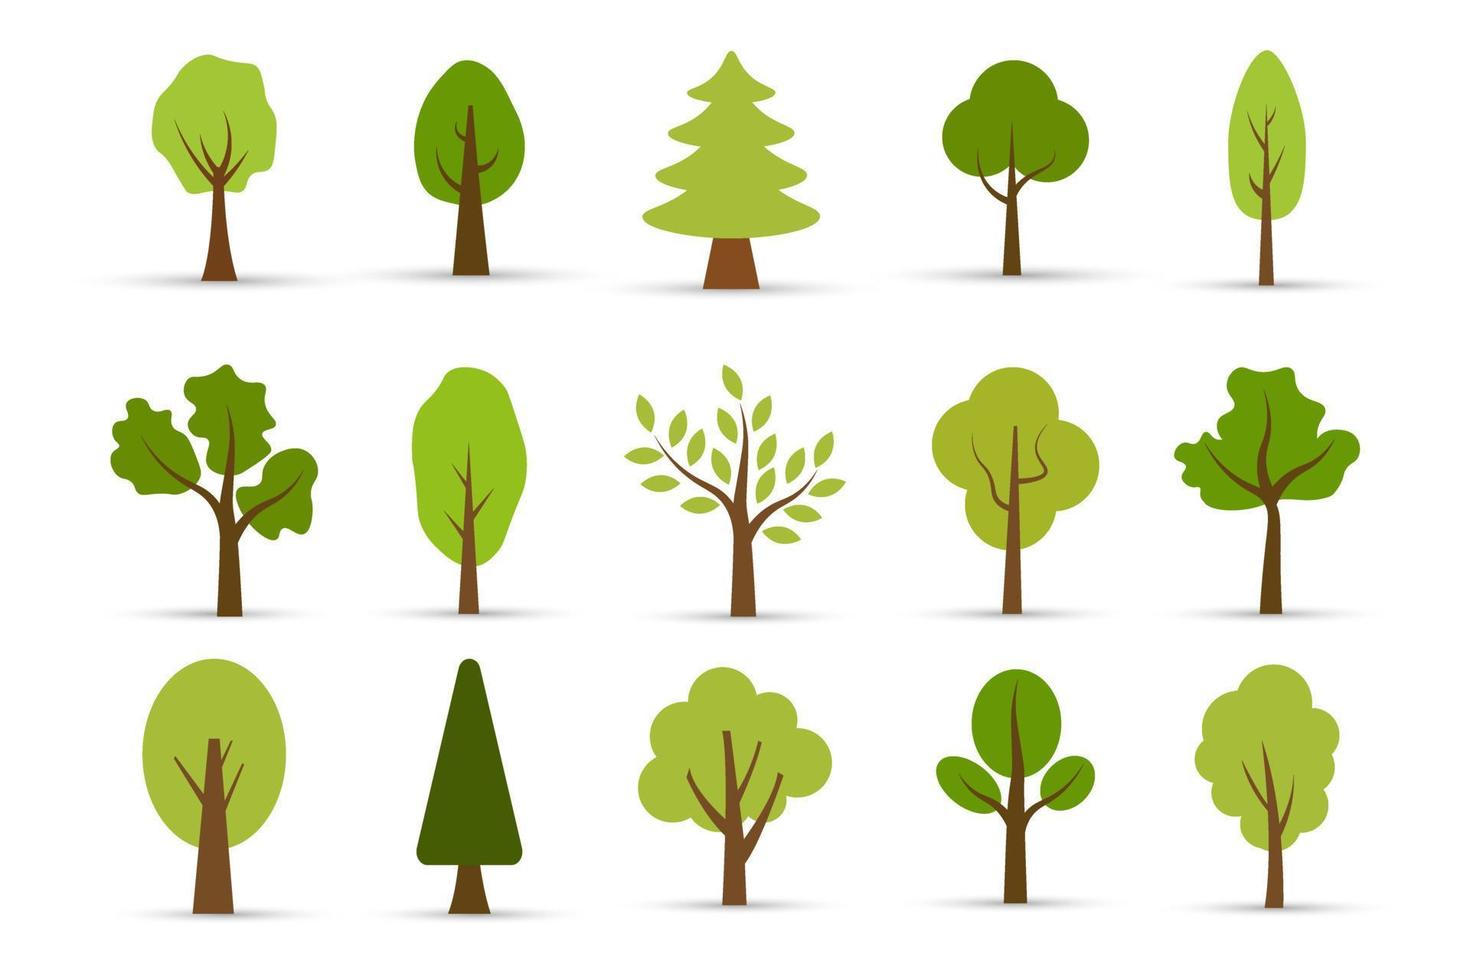 Flat Set Of Different Trees With Flat Design. It can be used to illustrate any nature or healthy lifestyle topic. Vector background